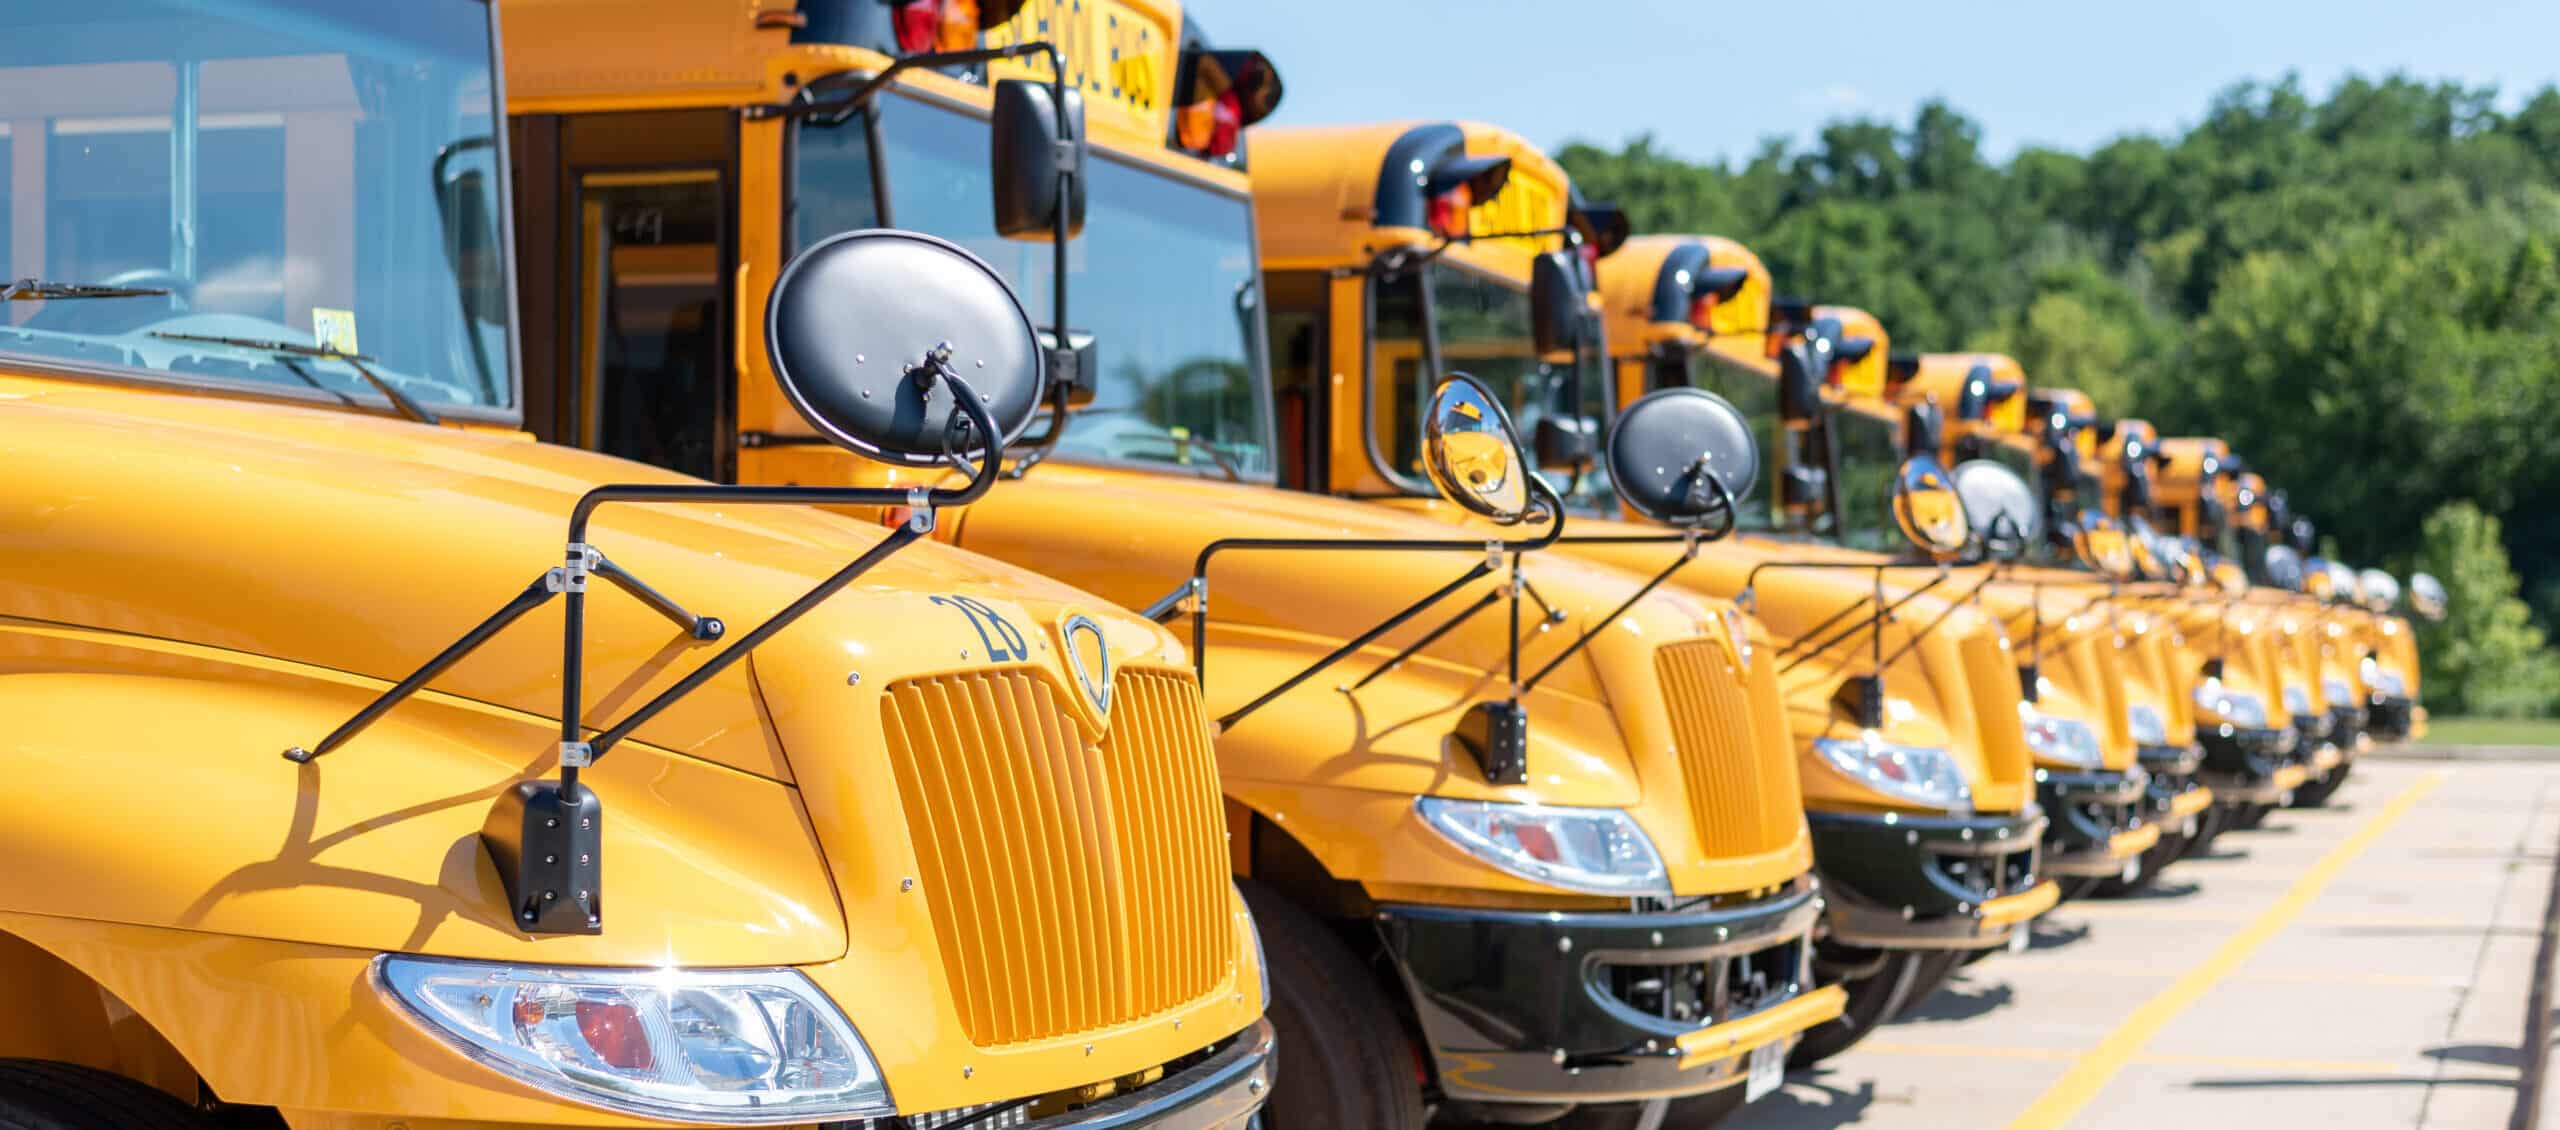 Saratoga Springs School Busses |ClearPath Mortgage Solutions